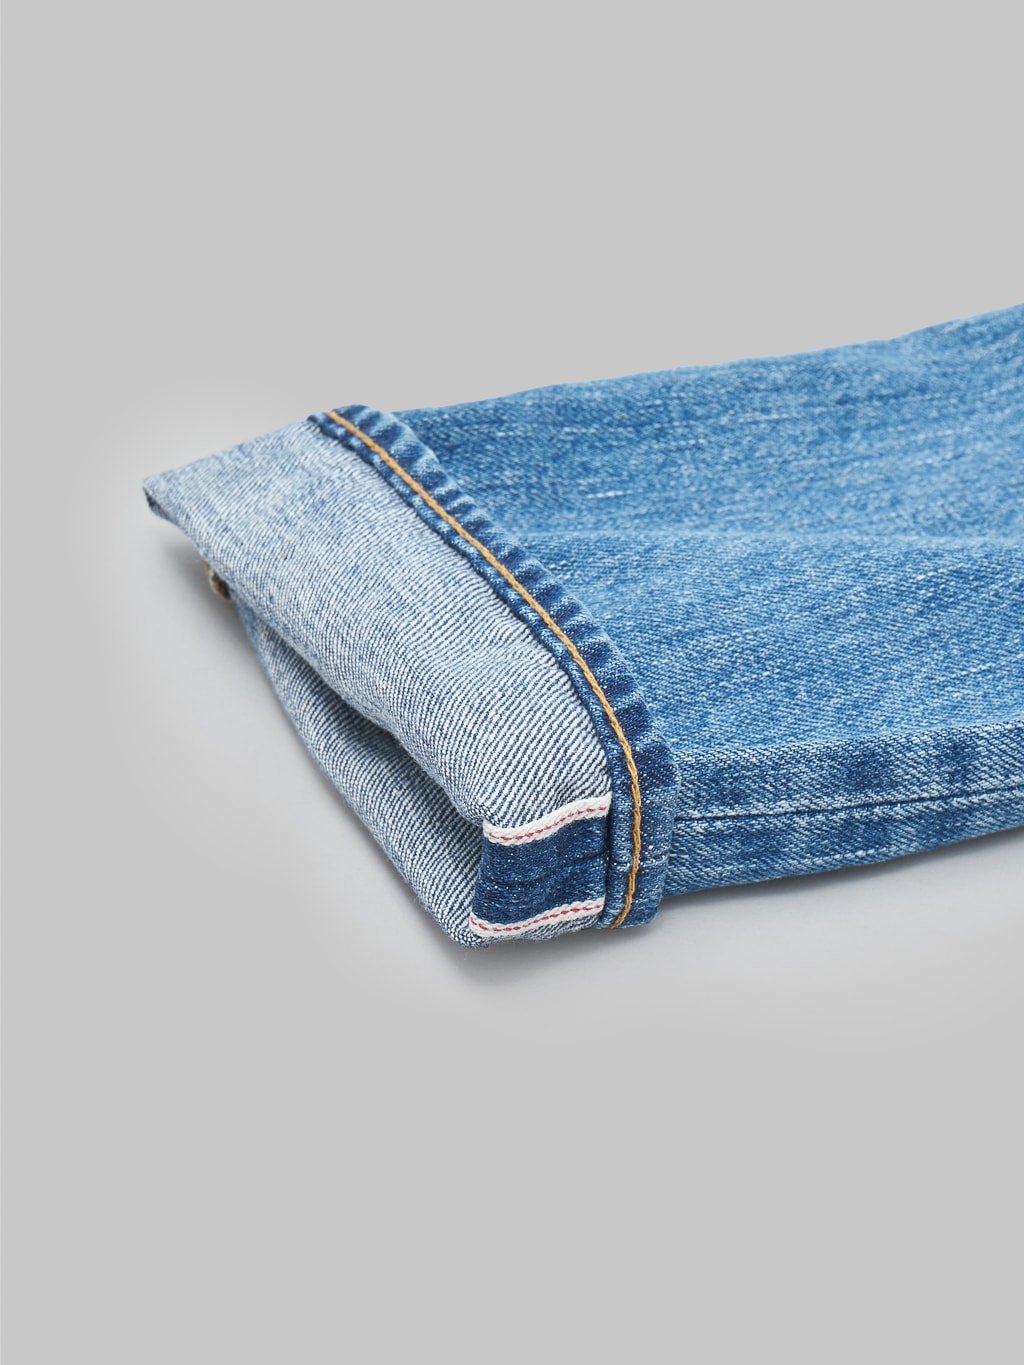 Japan Blue J304 Africa cotton Stonewashed Straight Jeans selvedge id